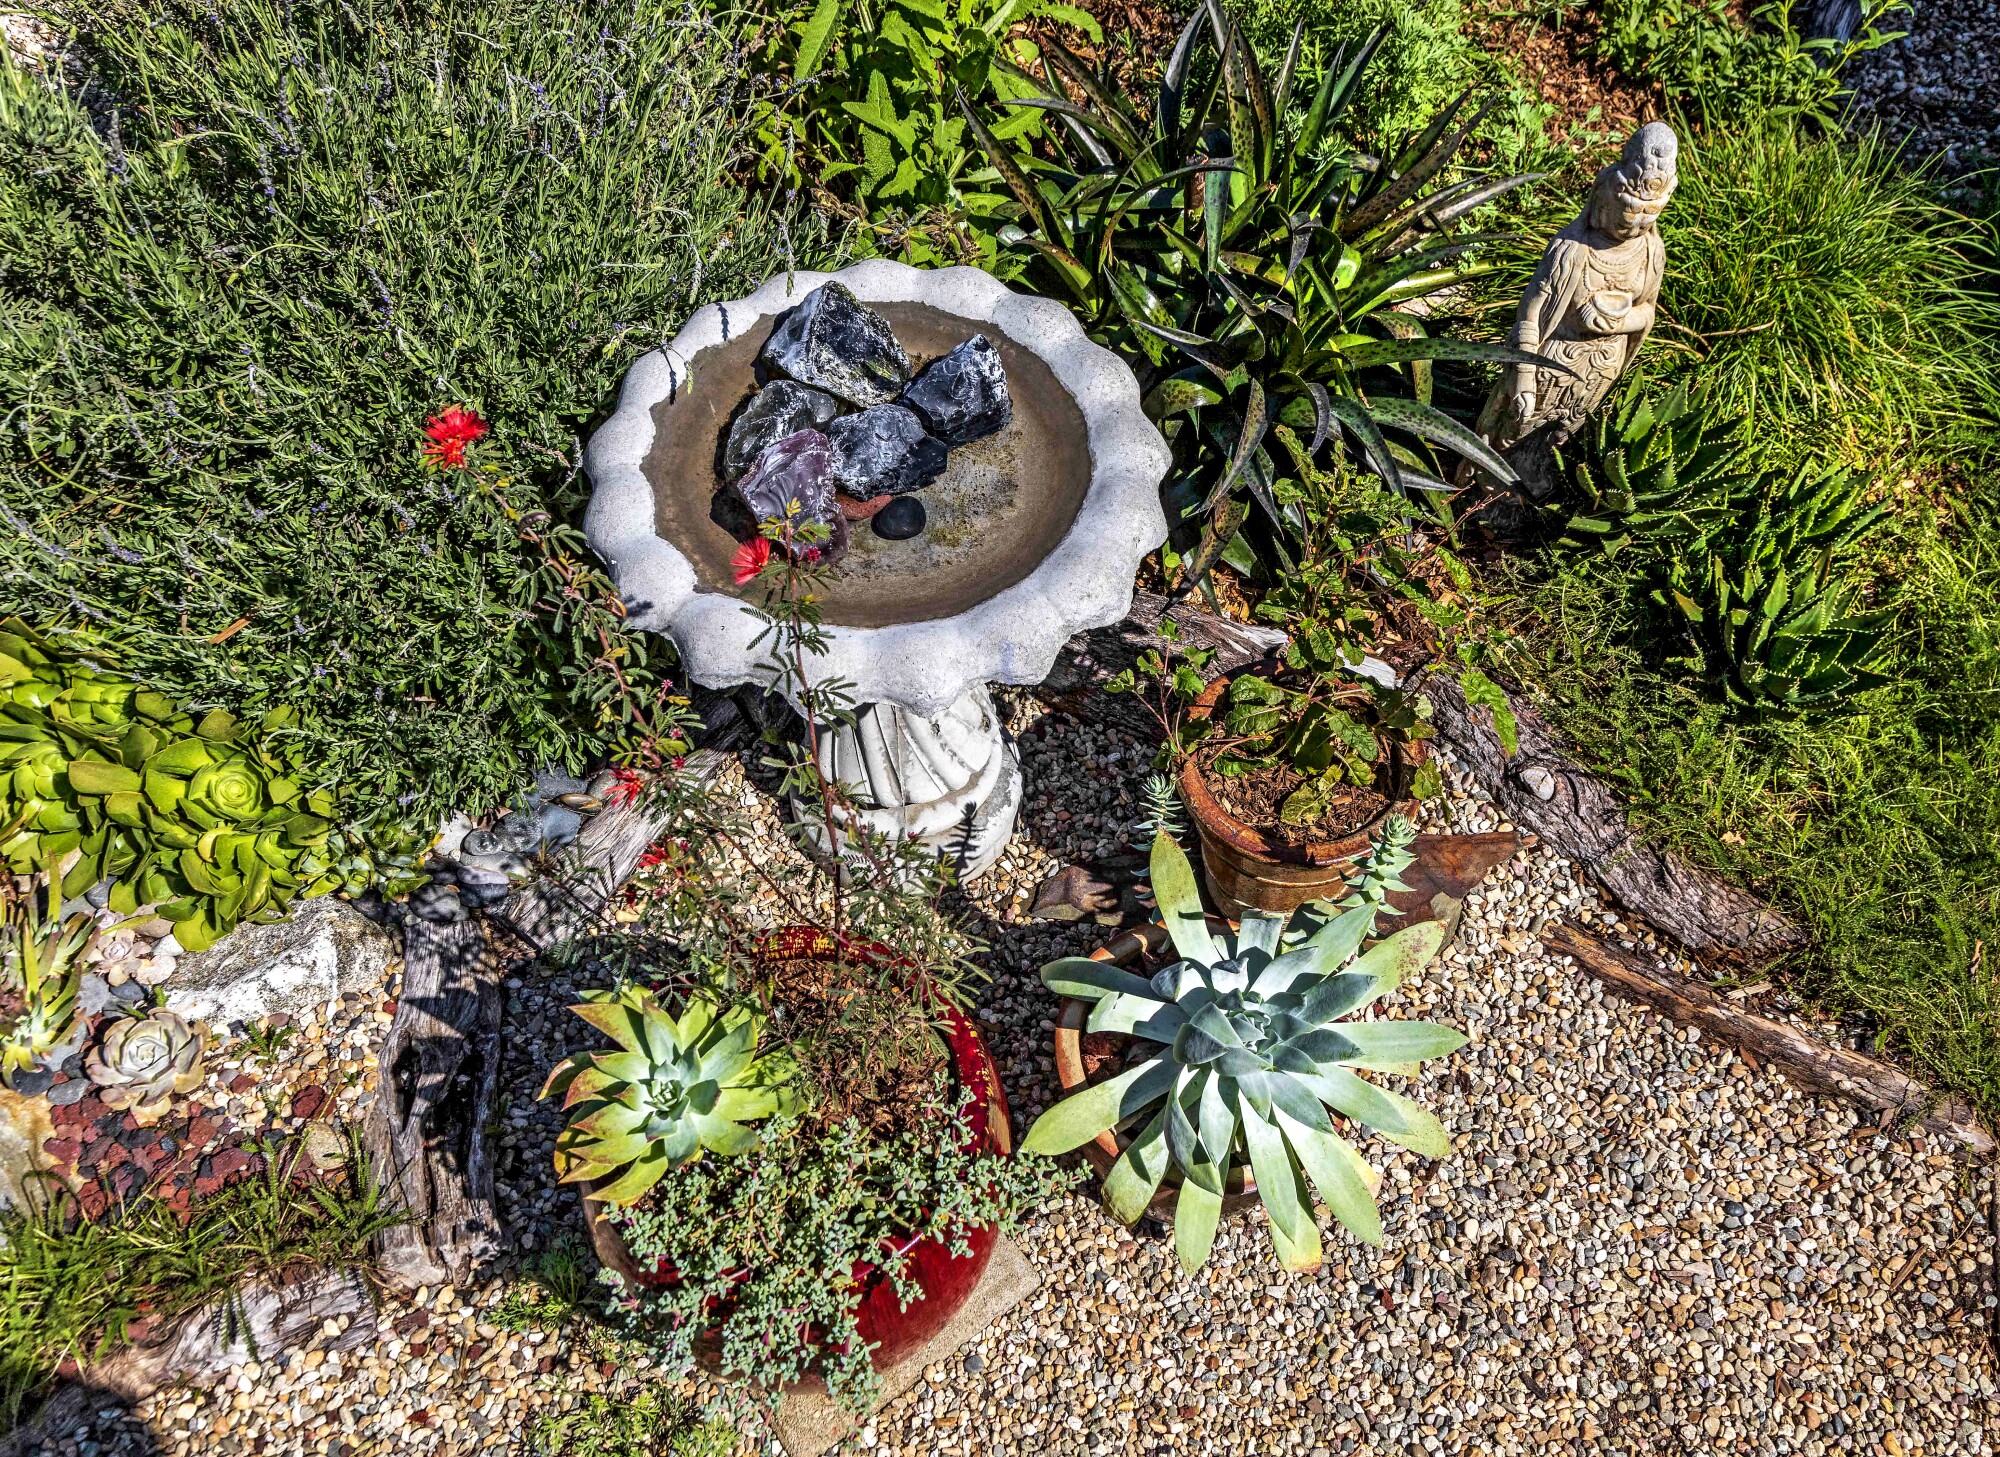 A birdbath surrounded by potted plants and pea gravel